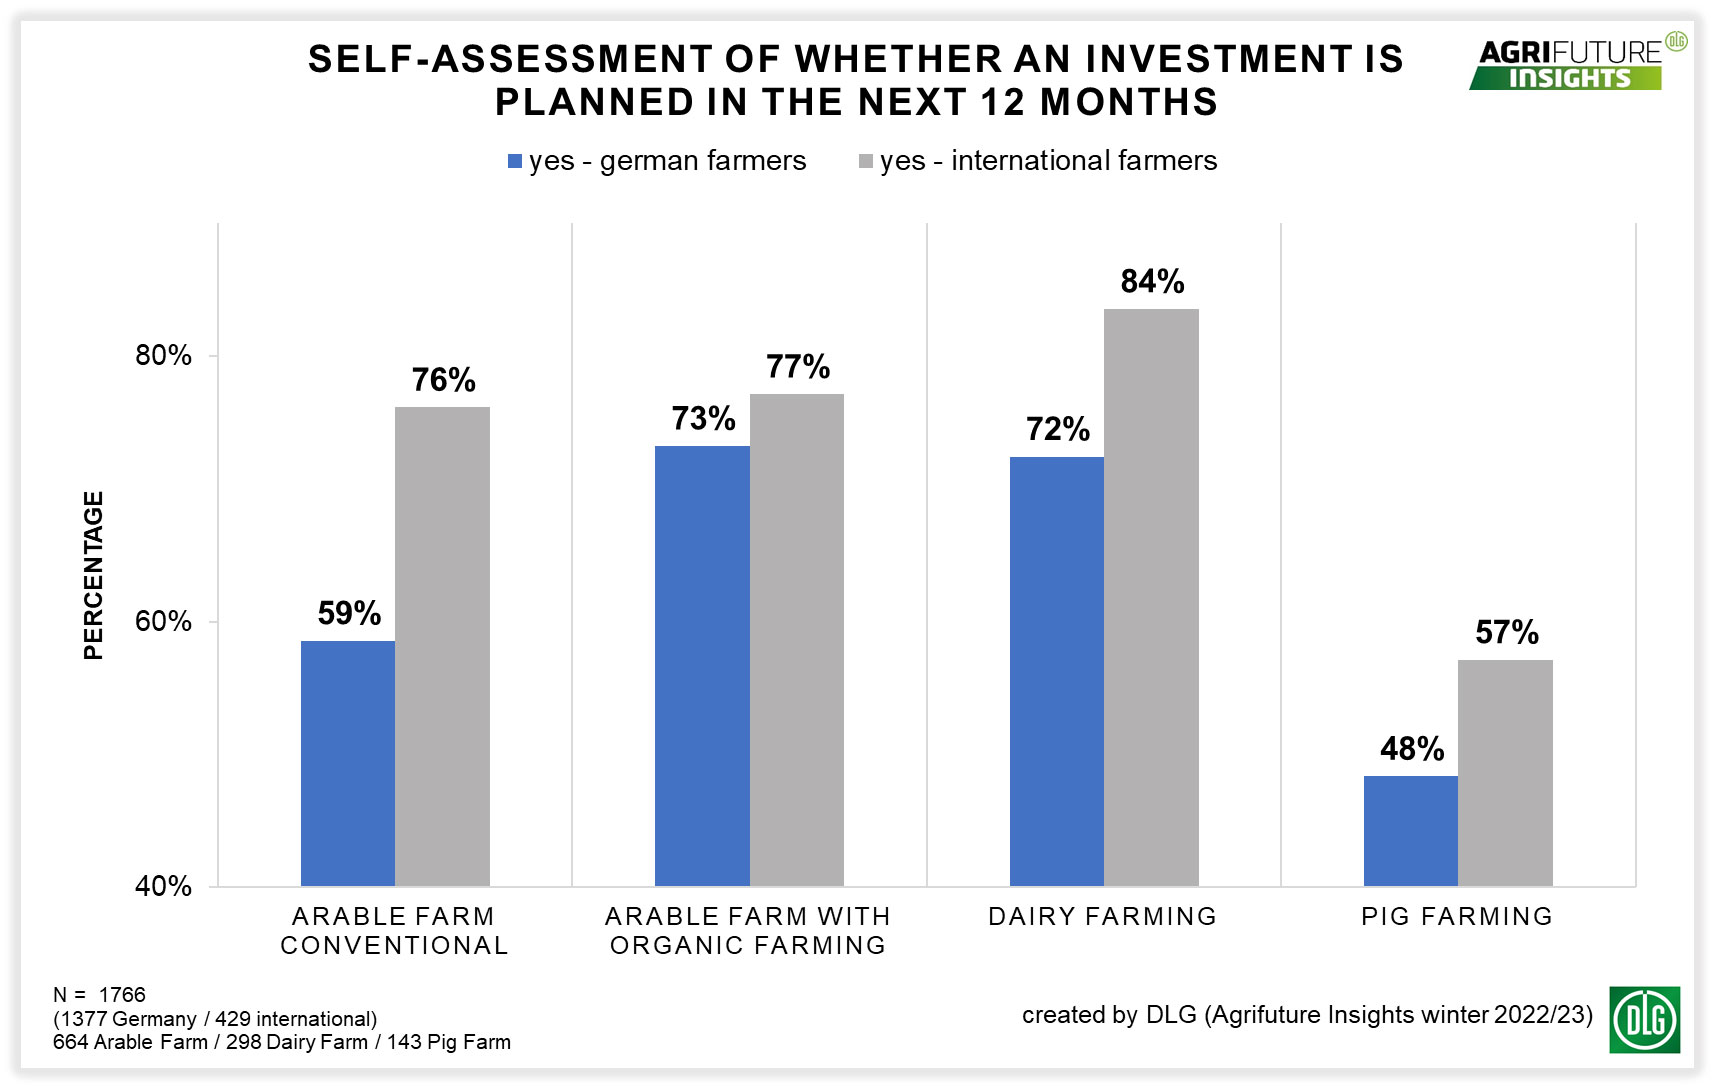 Graphic 2: Self-assessment of whether an investment is planned in the next 12 months until end 2023